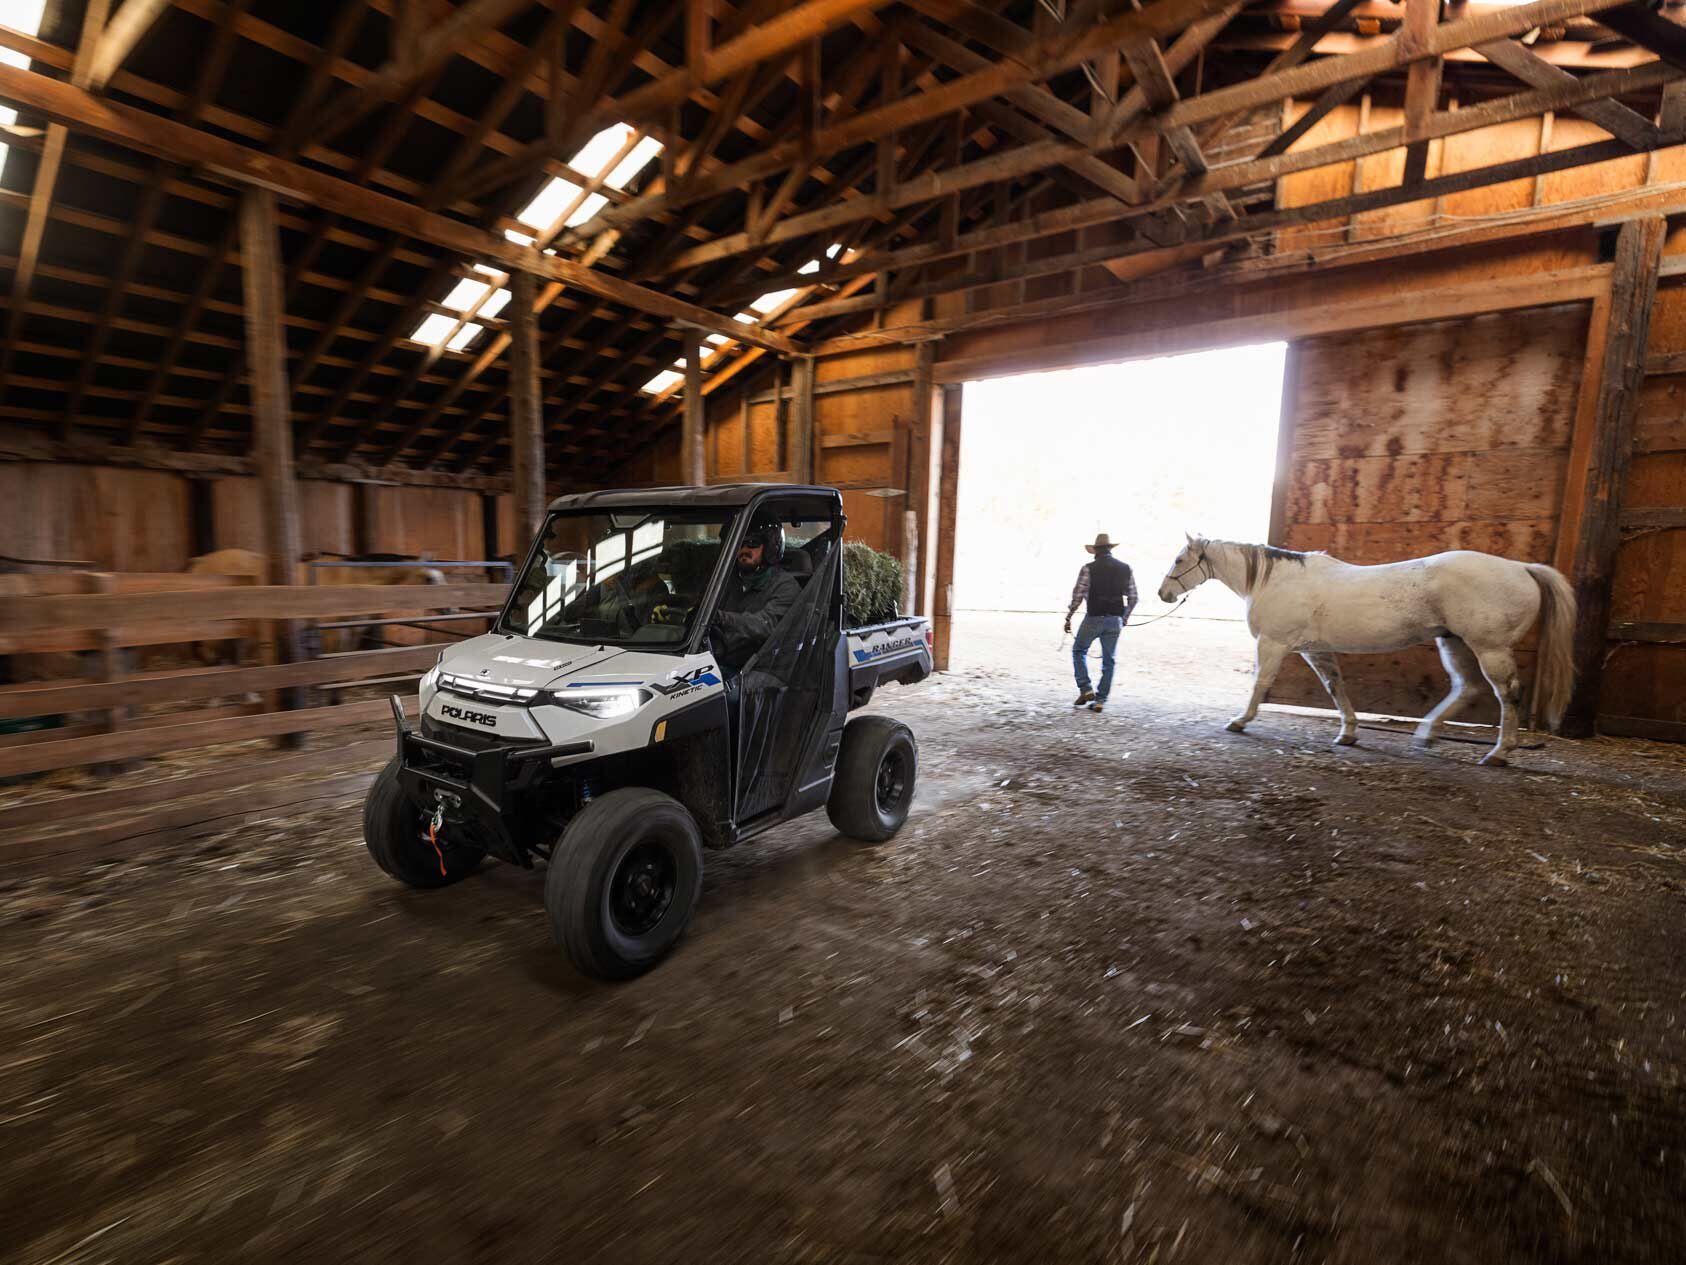 With a virtually silent electric powertrain, the Ranger XP Kinetic excels at work around sensitive animals and neighbors who value peace and quiet.